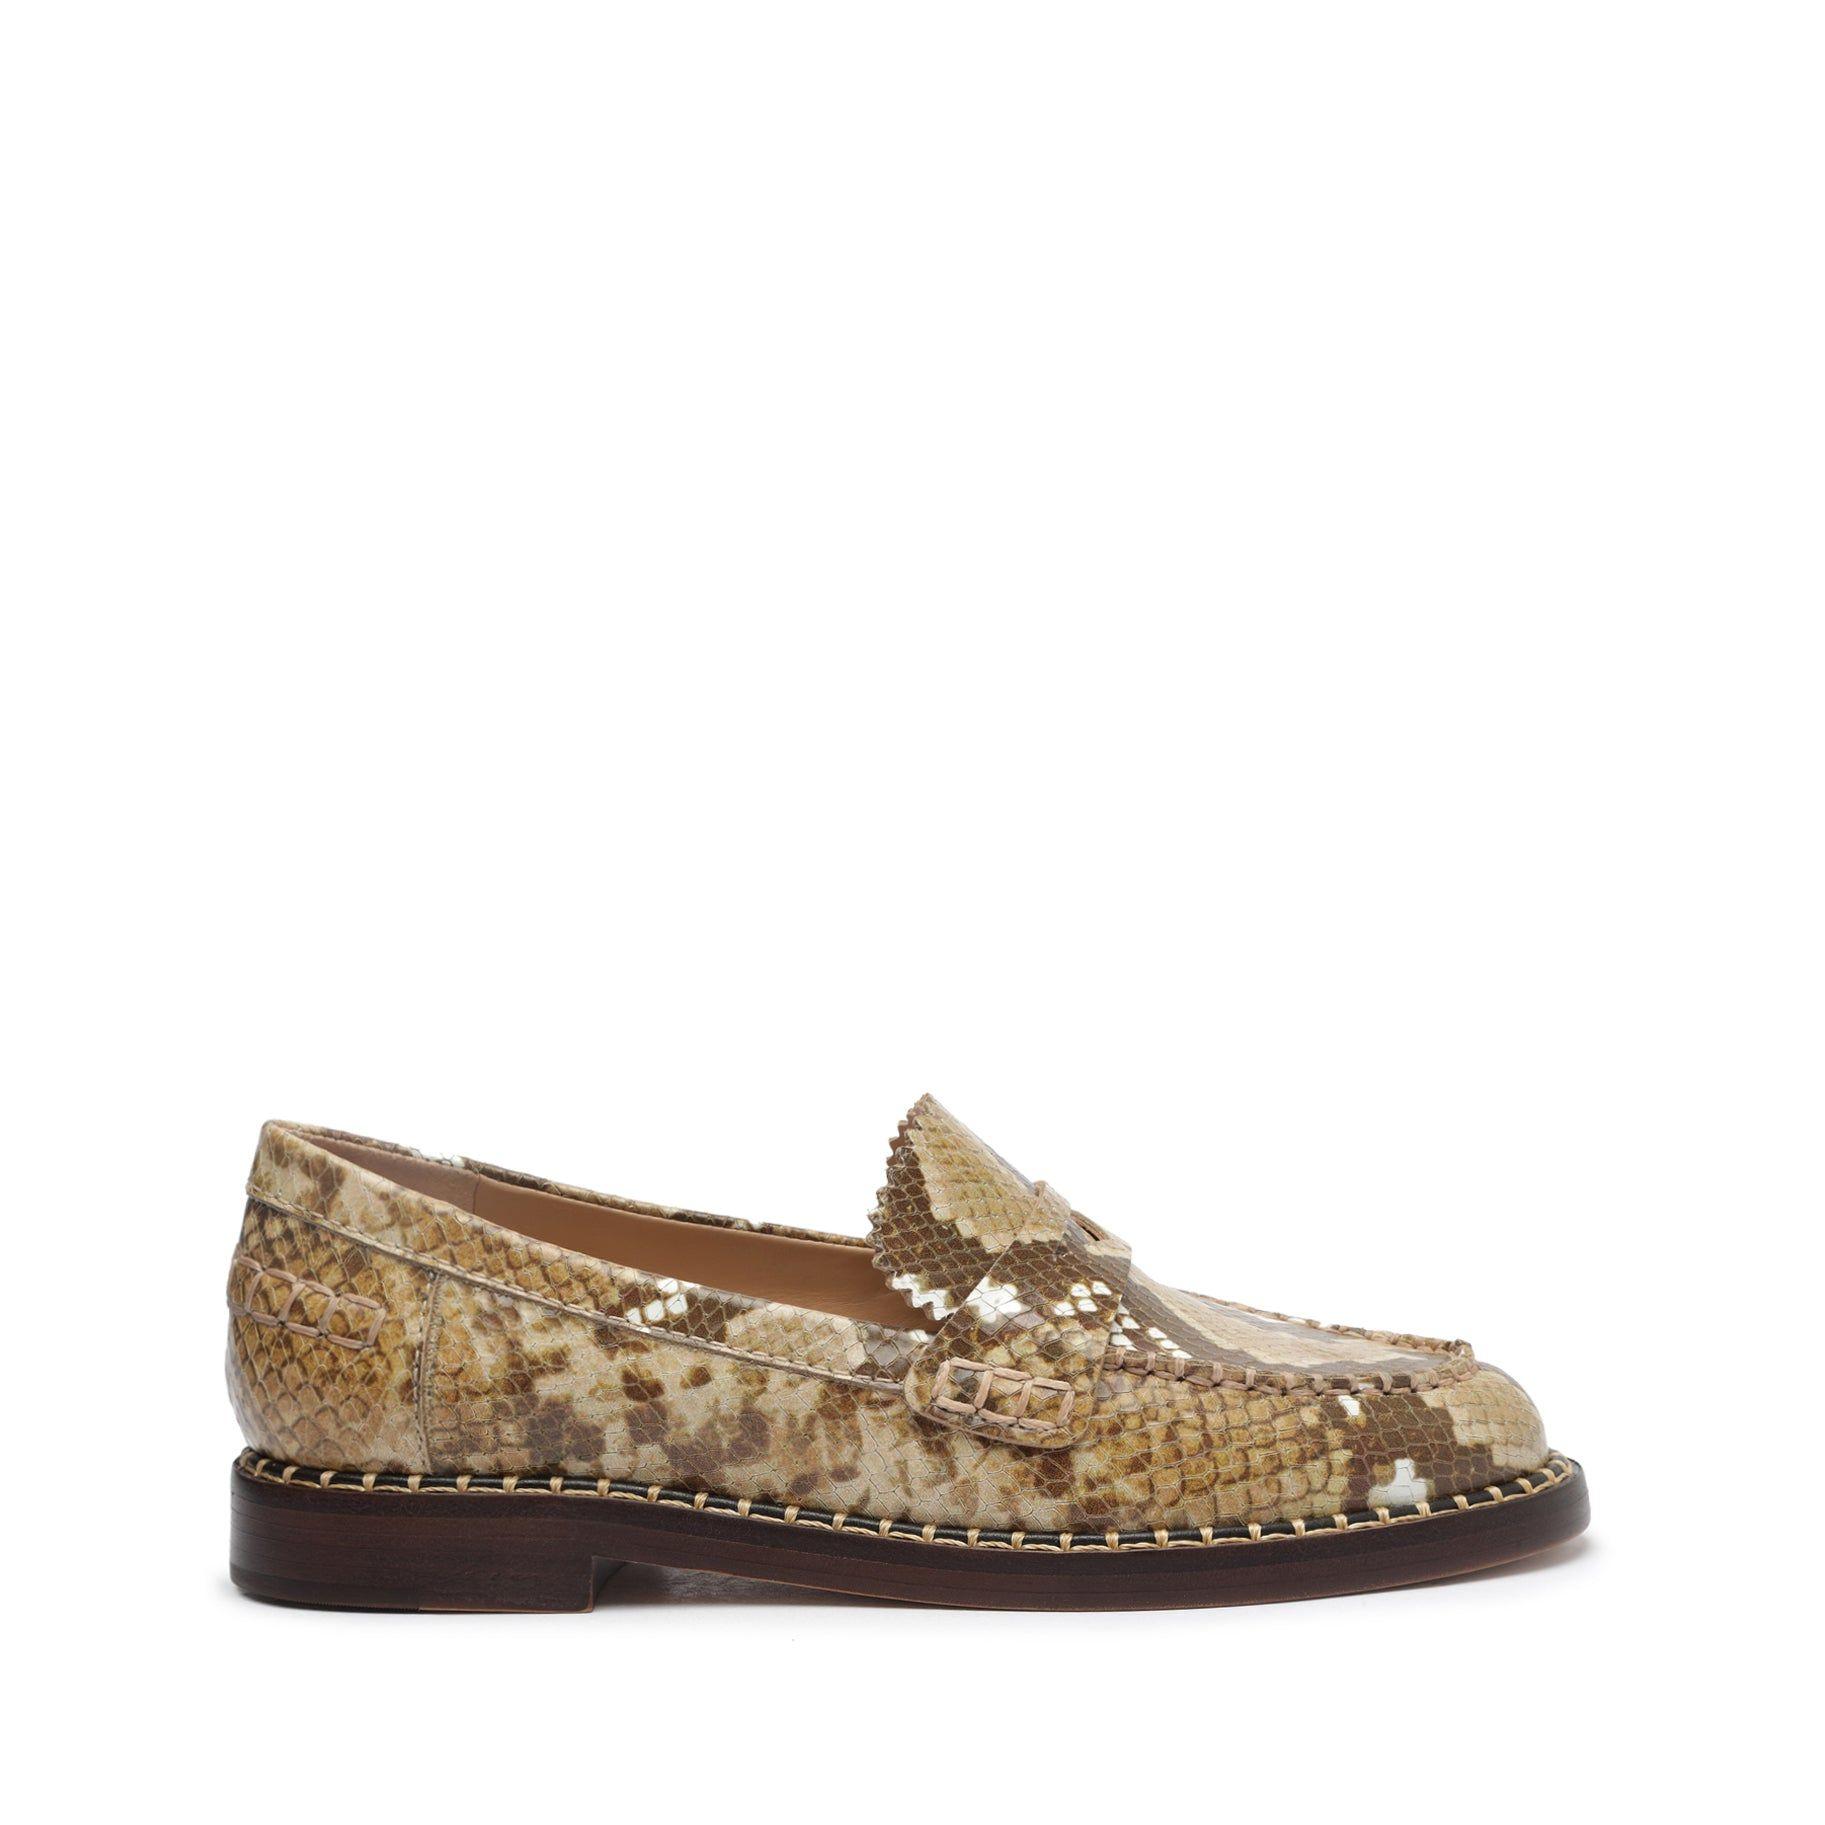 SCHUTZ SHOES Christie Snake-embossed Leather Flat in Brown | Lyst